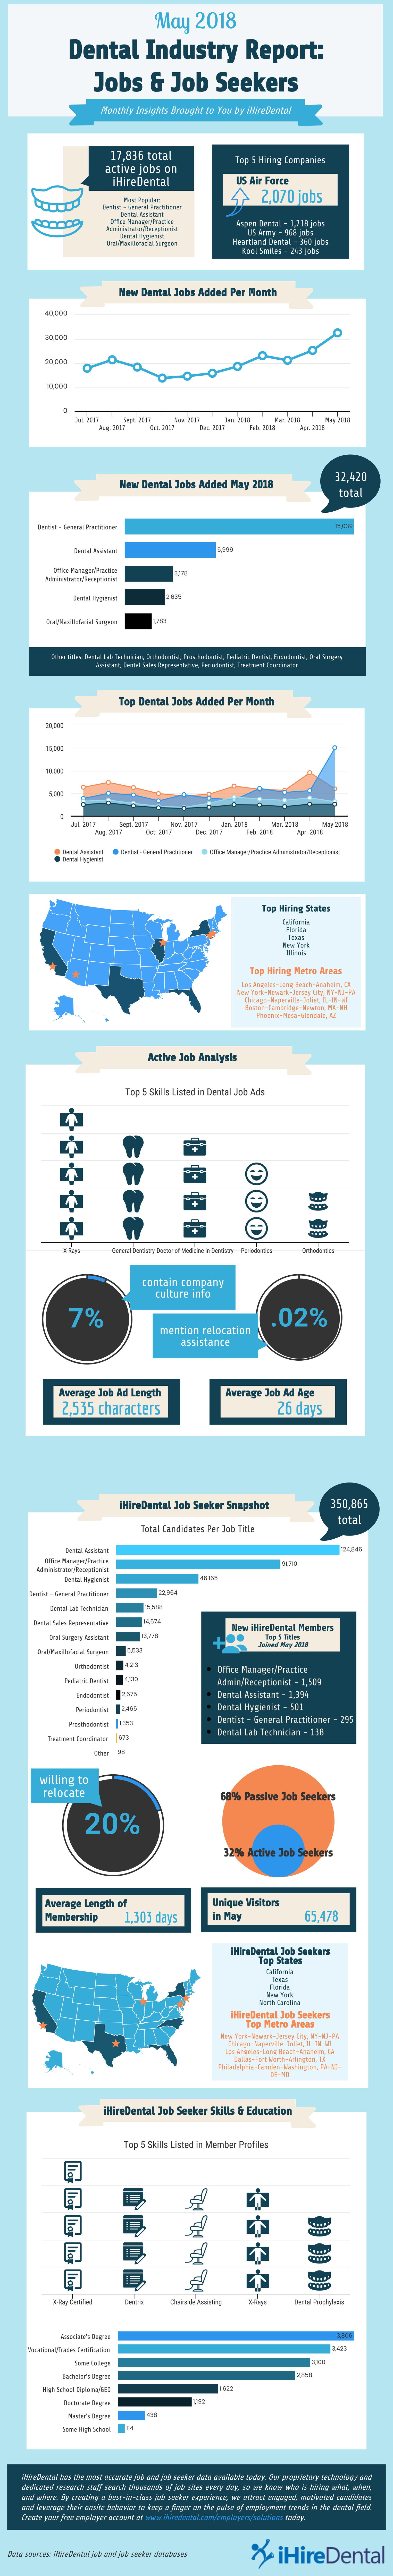 ihiredental may 2018 dental industry report infographic